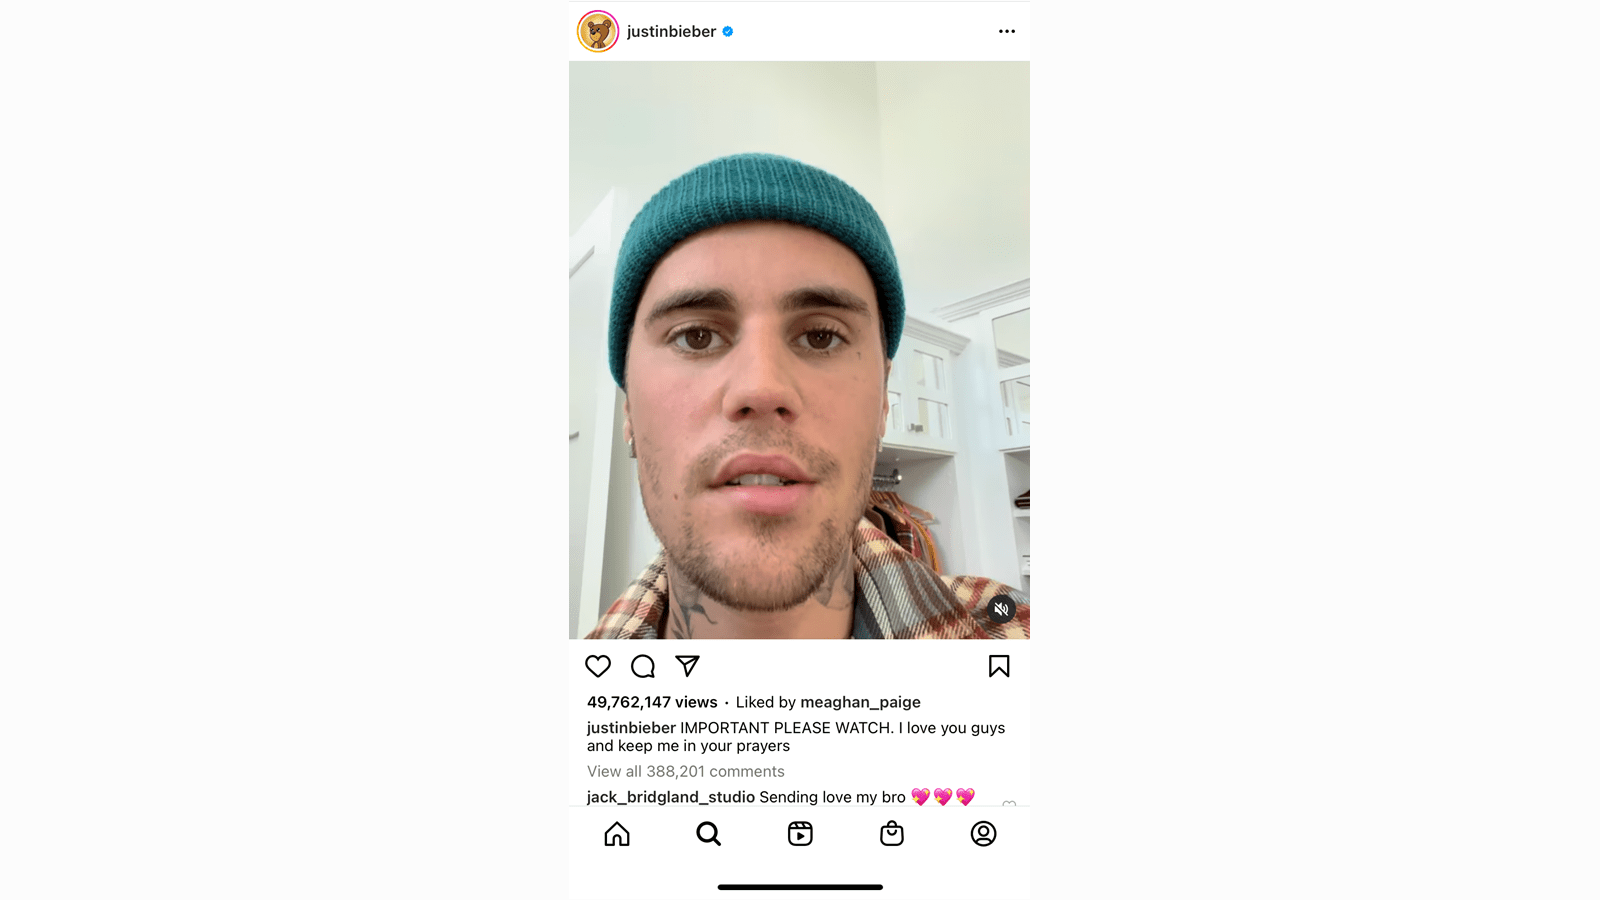 Justin Bieber announces on Instagram that he has a rare disorder causing facial paralysis